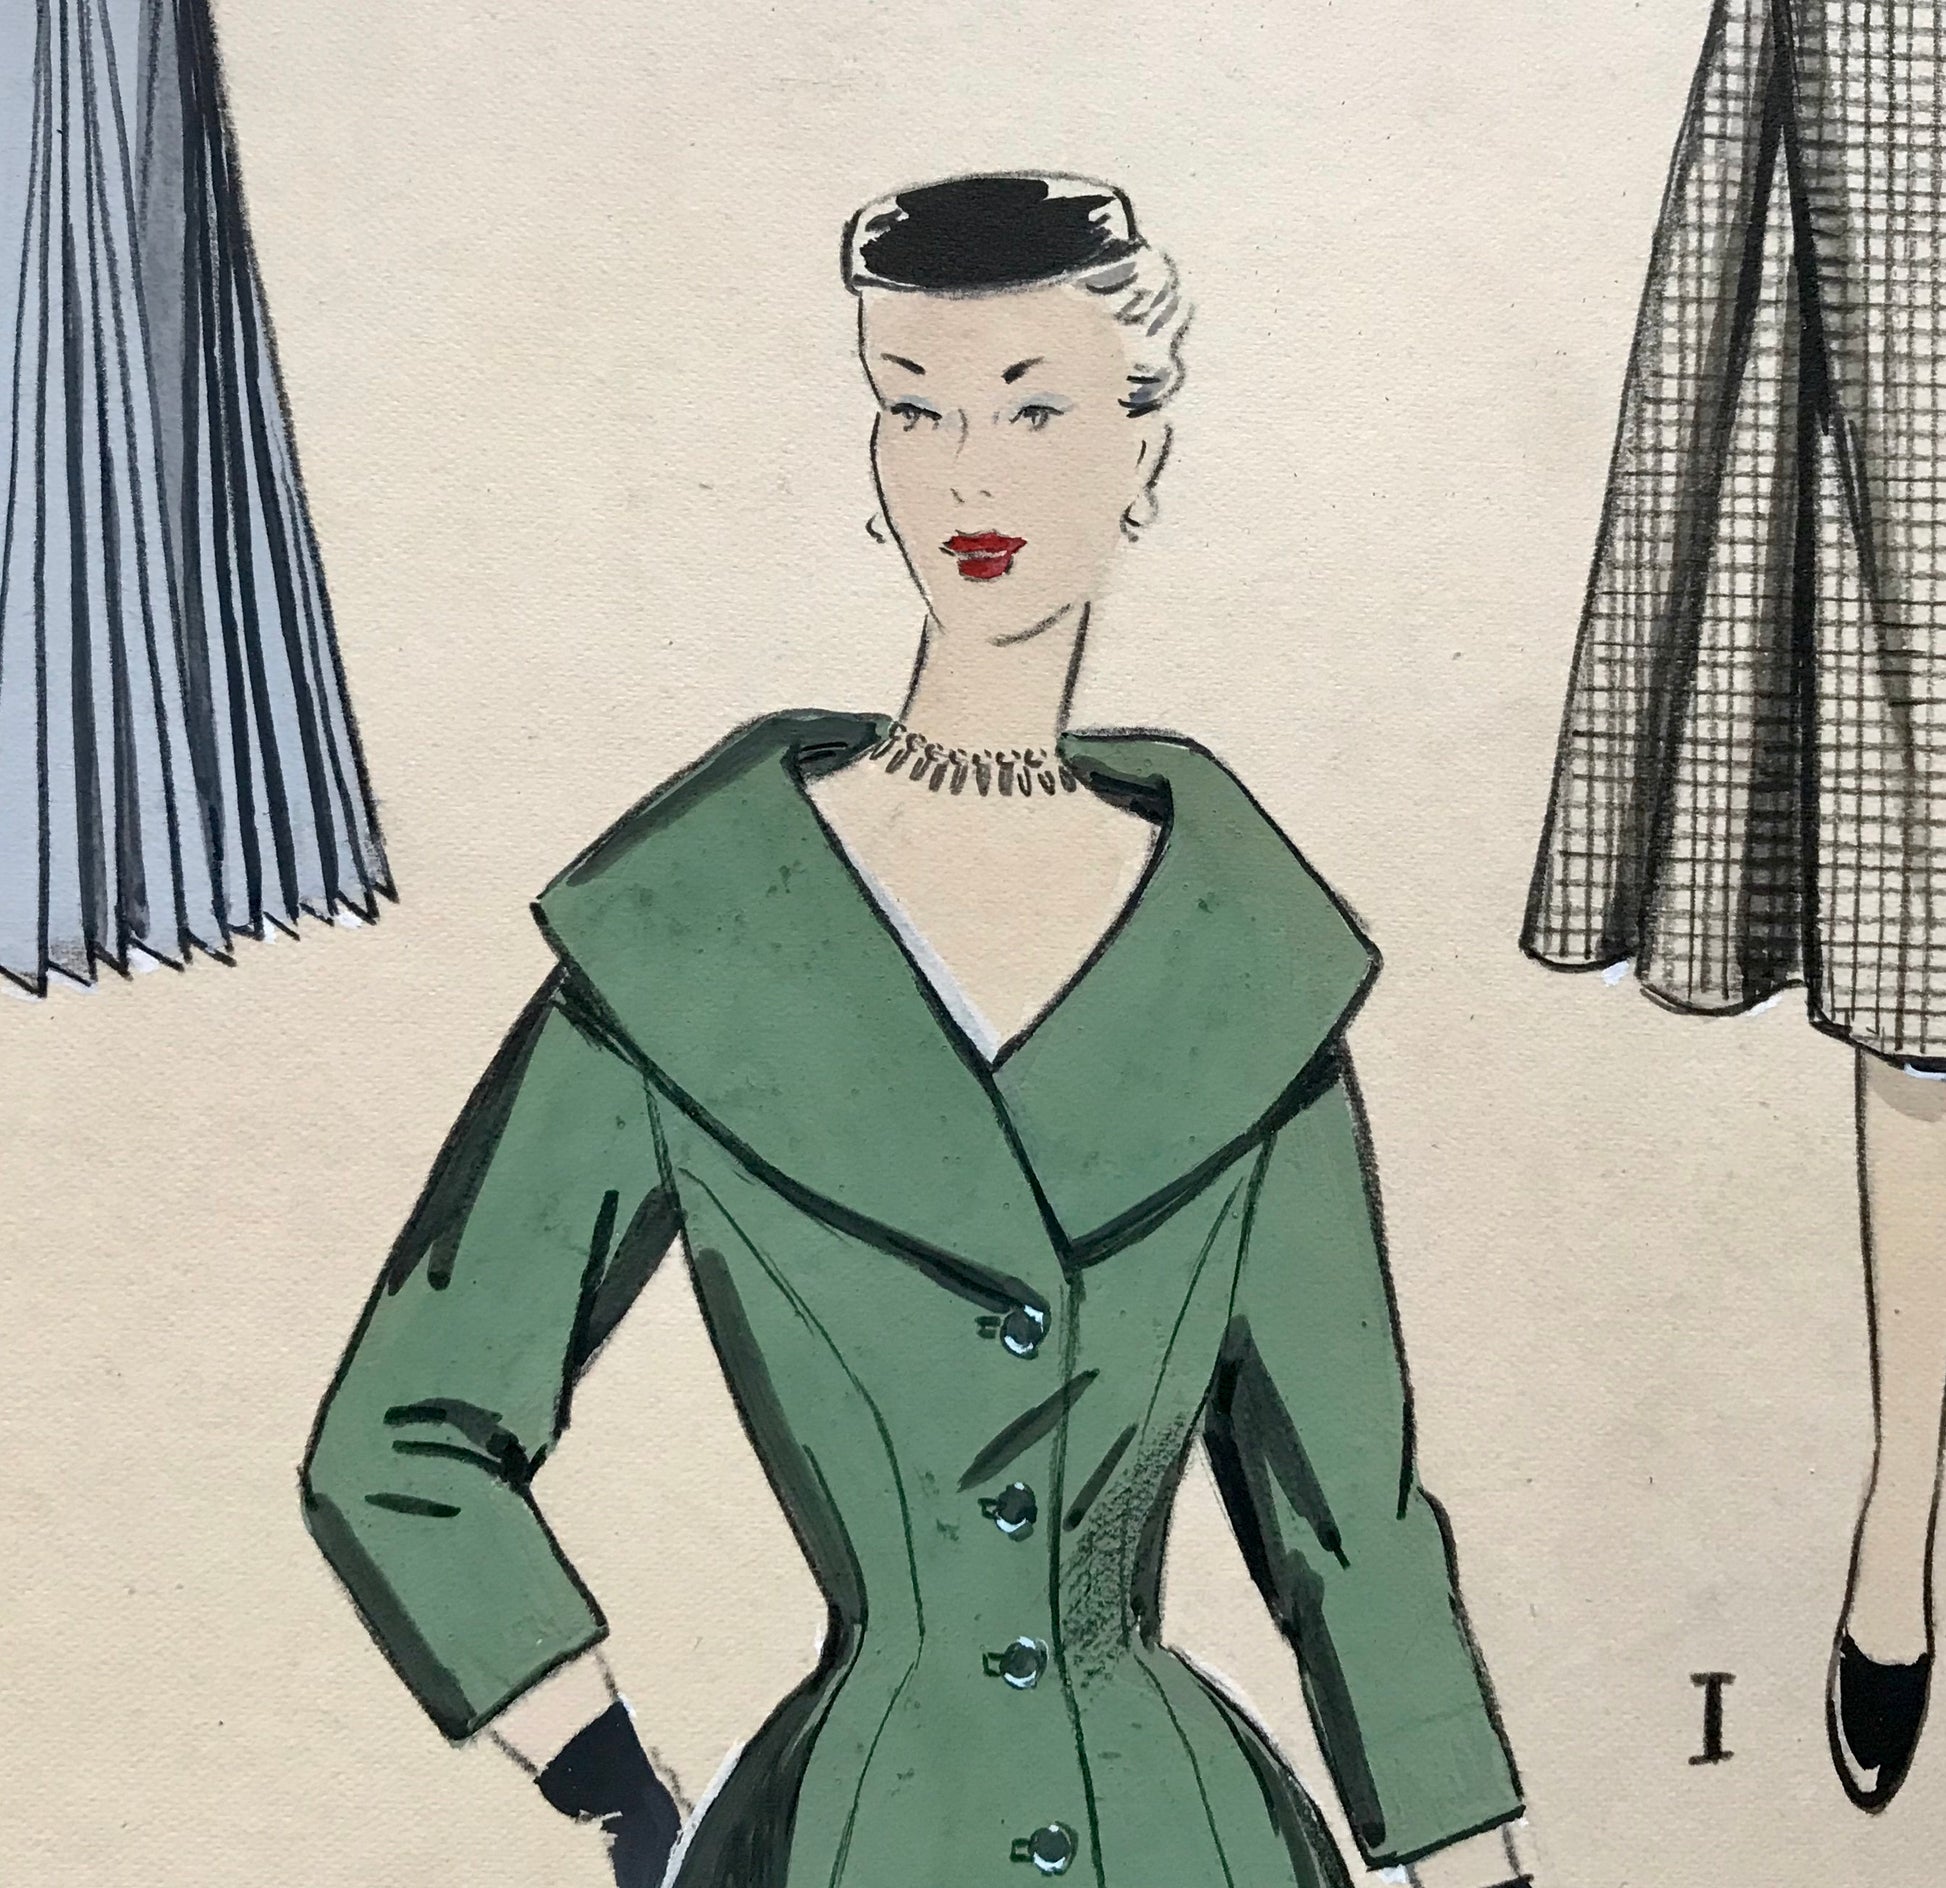 A Large Hand Drawn and Hand Painted Fashion Illustration. From Barcelona, Spain. 1955. Size: 50.5 x 40.5 cms.